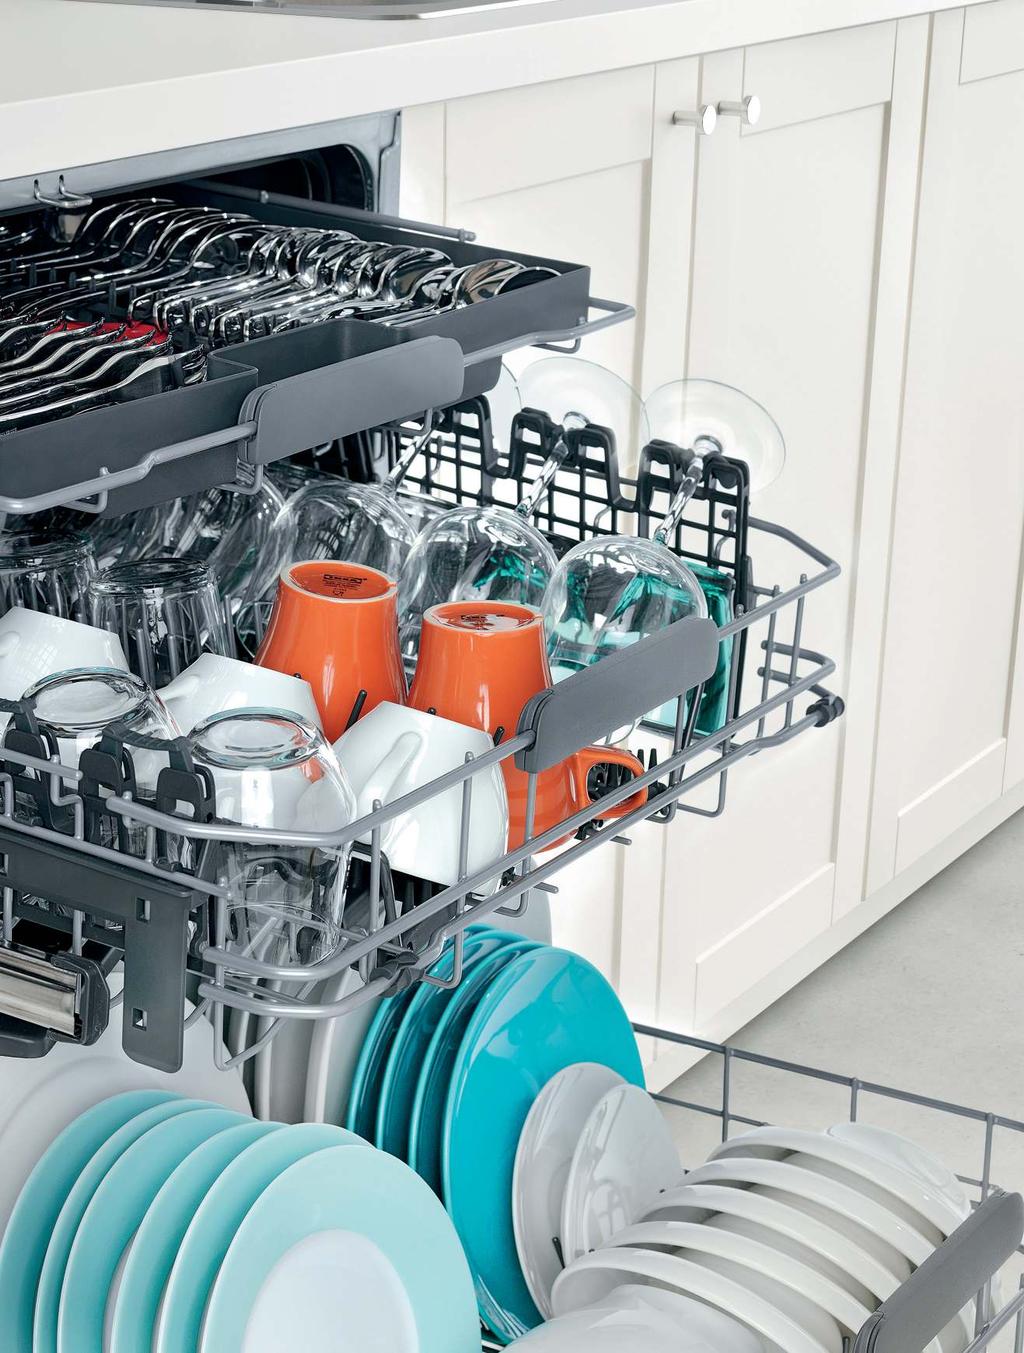 DISHWASHERS Using a dishwasher is more water and energy efficient than washing dishes by hand, and it's more hygienic too.